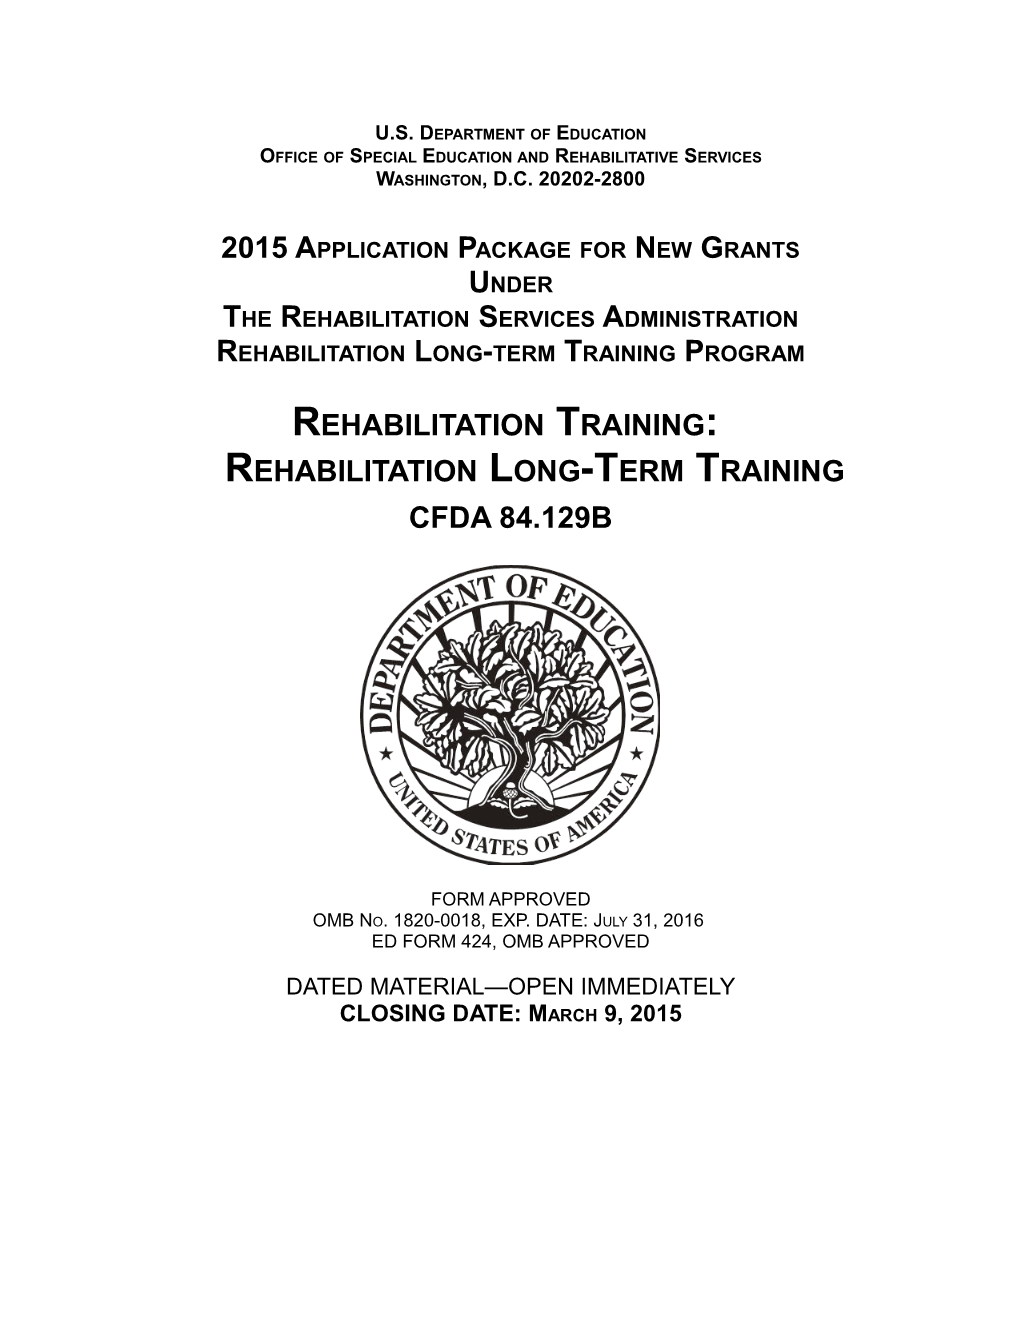 2015 Application Package for New Grants Under the Rehabilitation Services Administration;